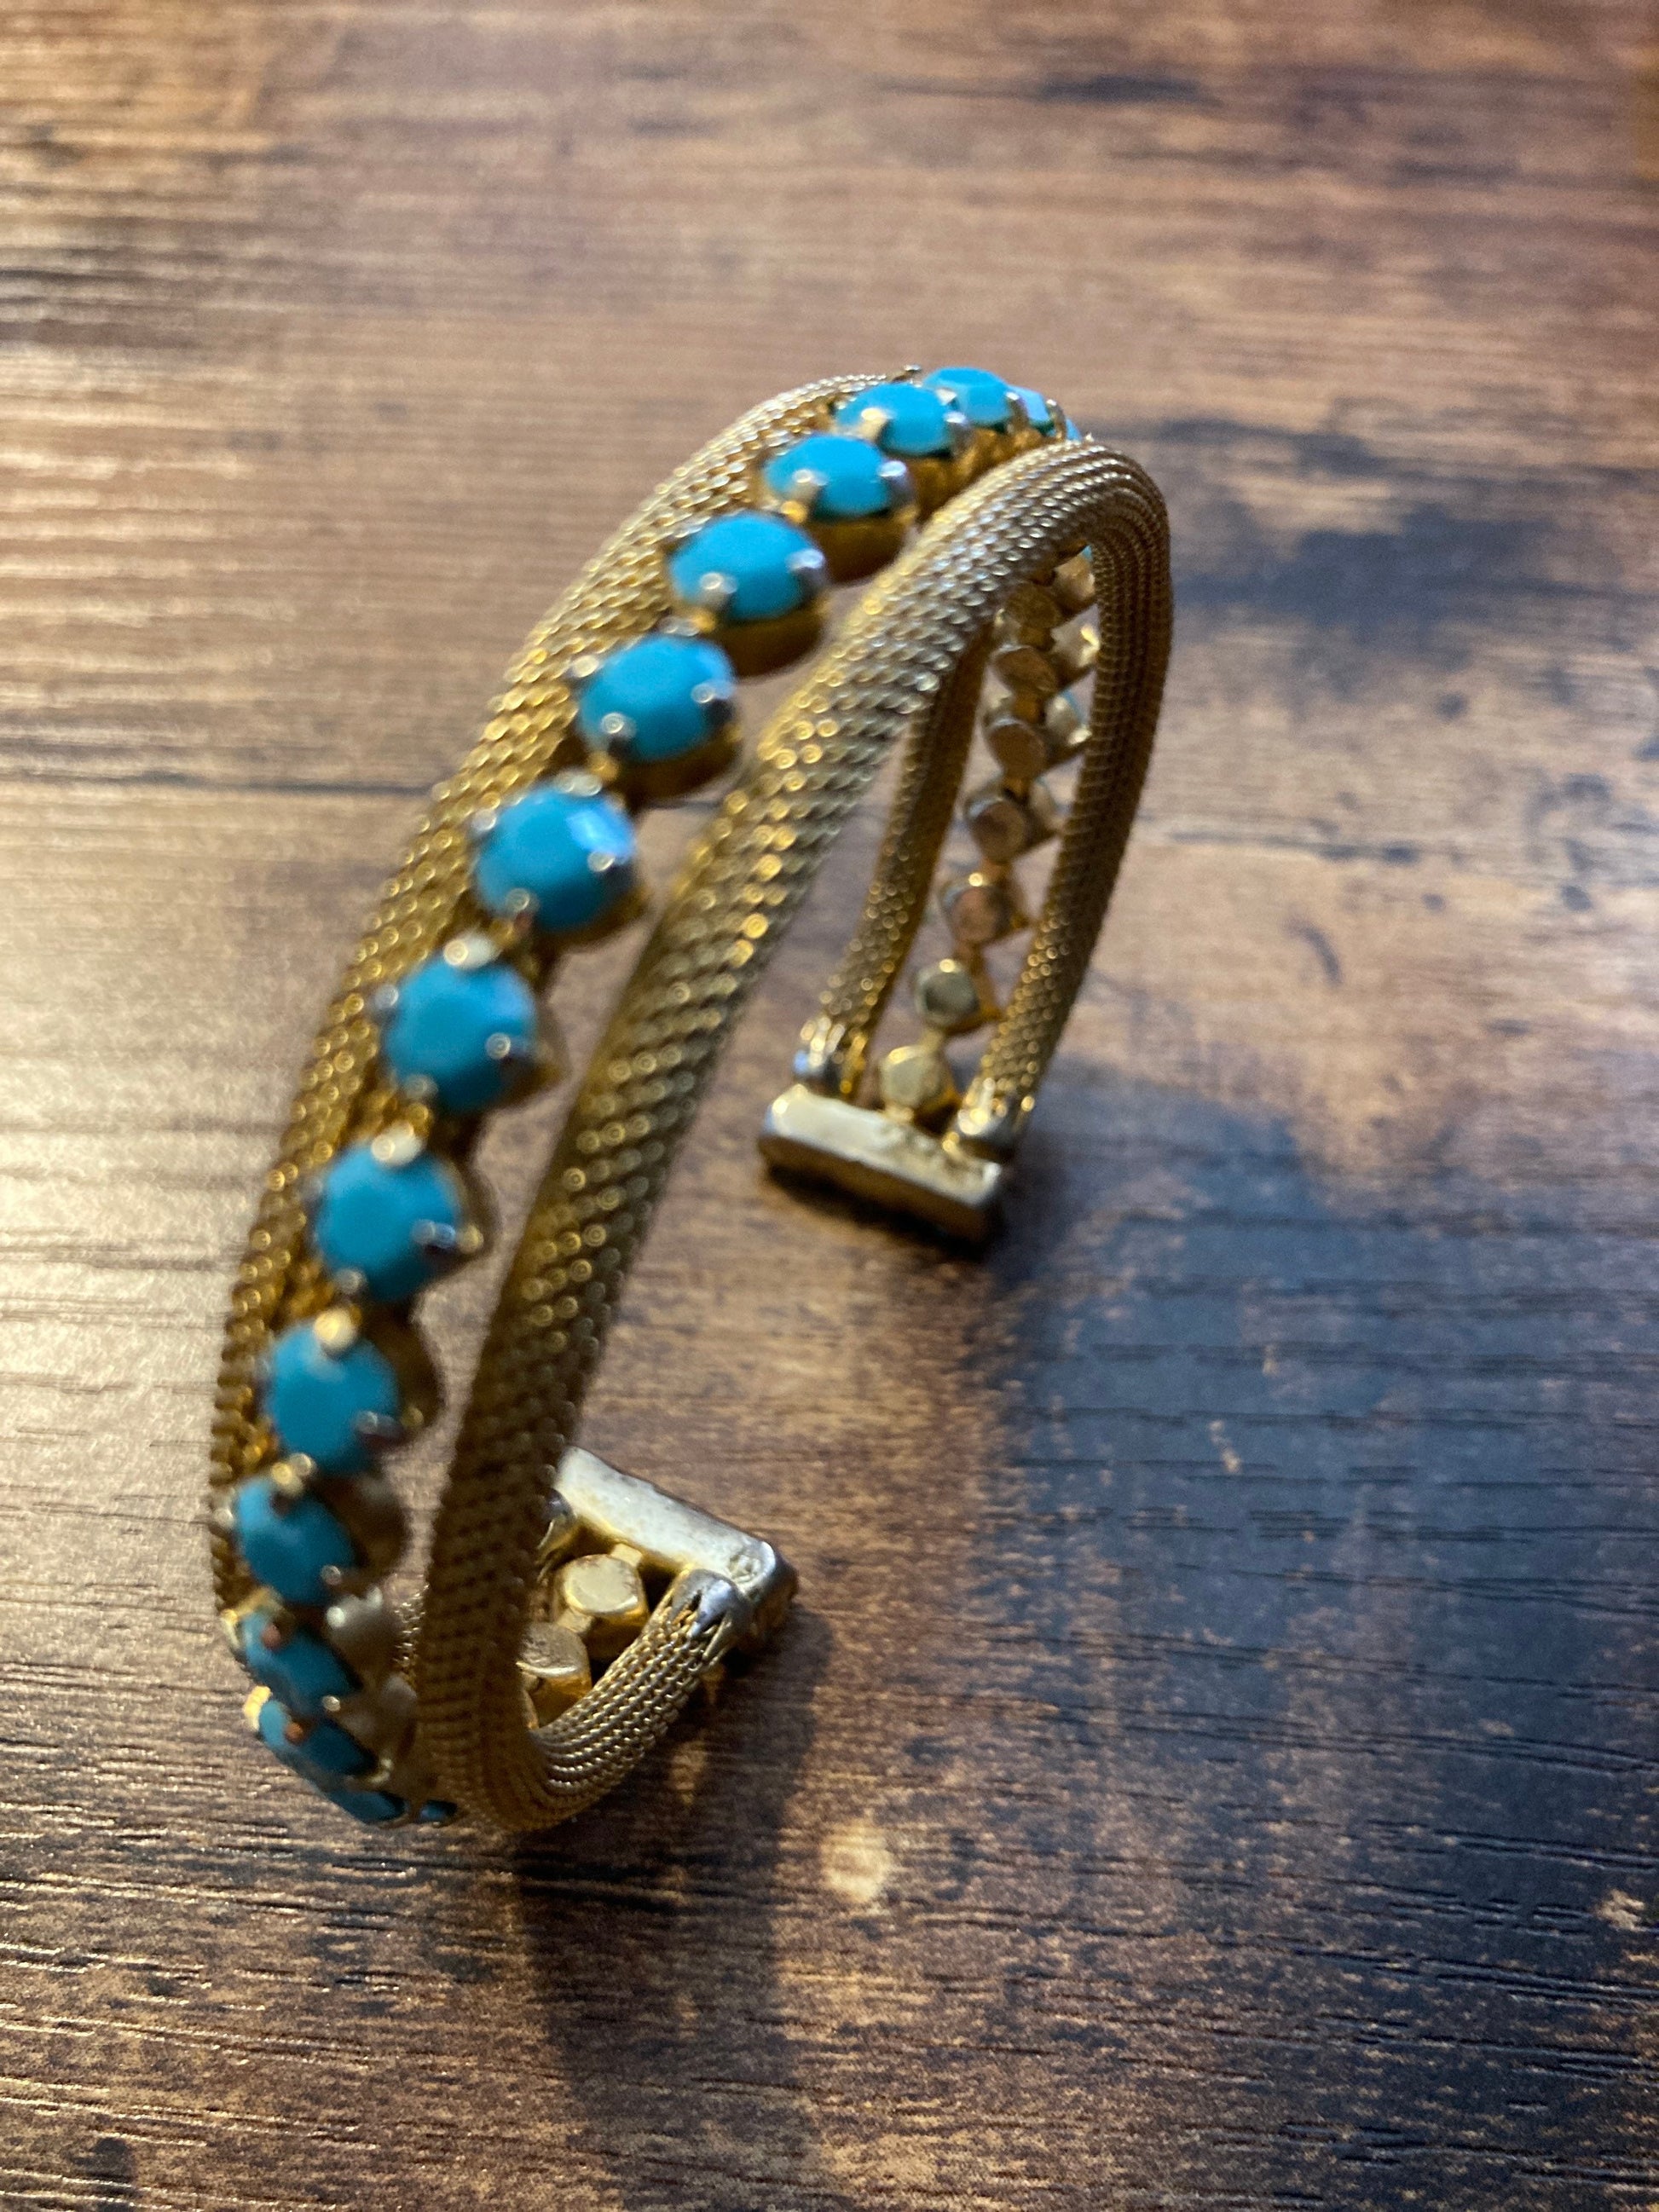 Vintage open ended adjustable fixed flat link textured gold tone gilt cuff bracelet with turquoise blue paste